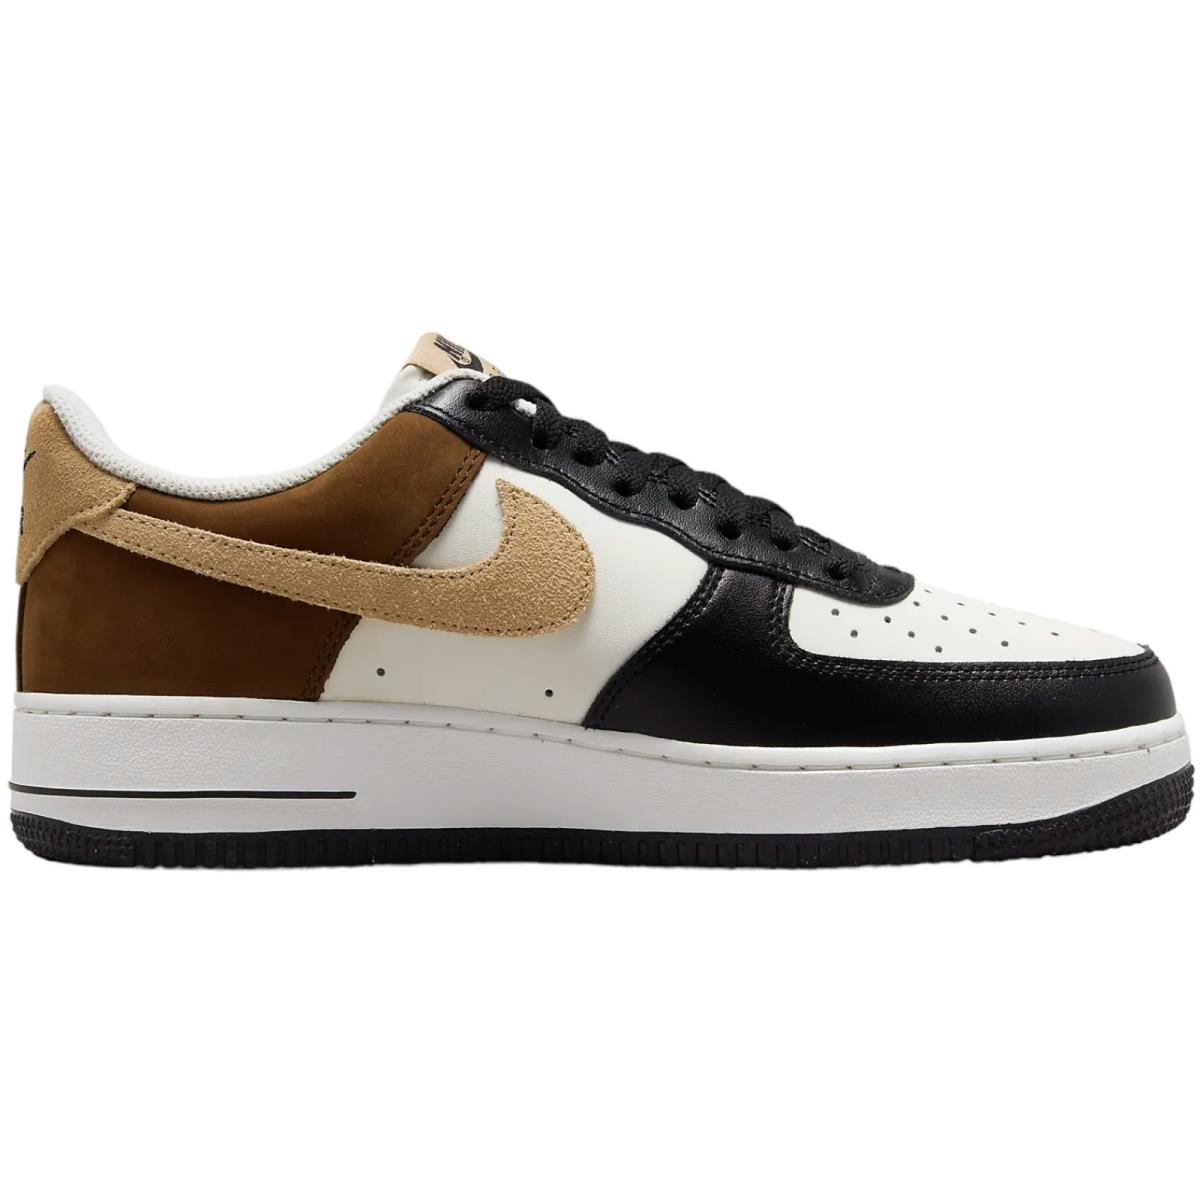 Nike Air Force 1 `07 Men`s Casual Shoes All Colors US Sizes 7-14 Cacao Wow/Sail/Summit White/Hemp